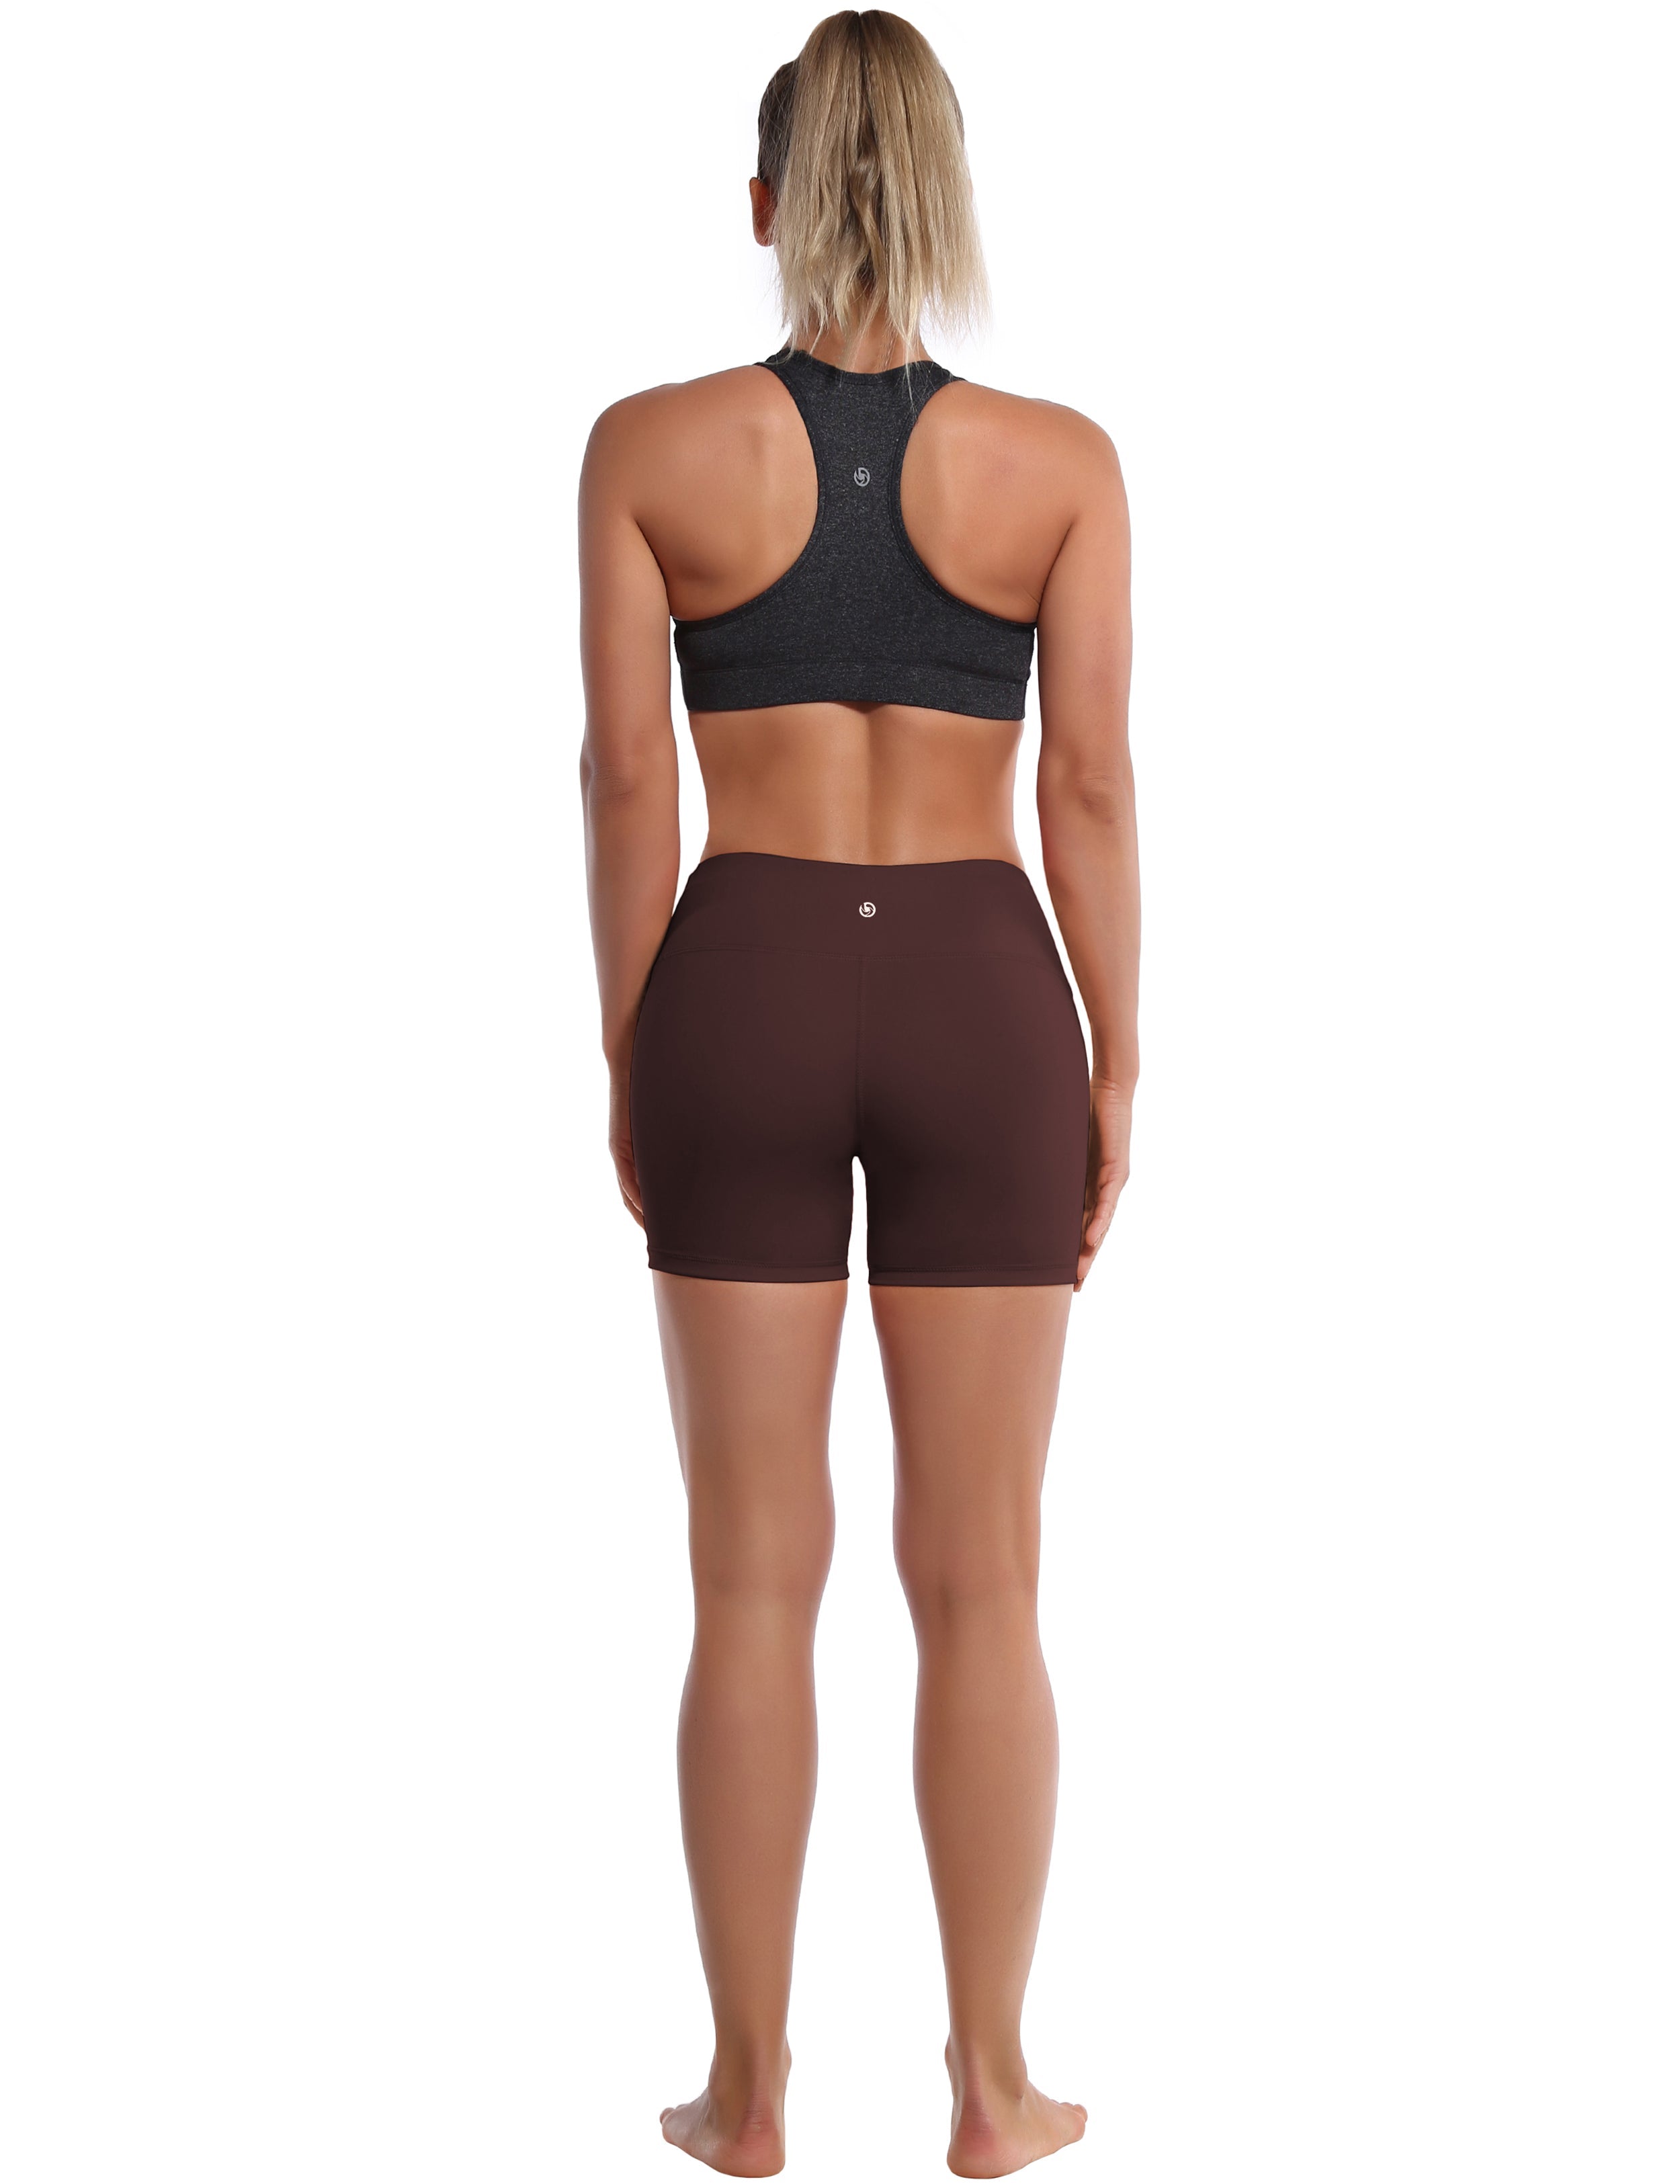 4" Yoga Shorts mahoganymaroon Sleek, soft, smooth and totally comfortable: our newest style is here. Softest-ever fabric High elasticity High density 4-way stretch Fabric doesn't attract lint easily No see-through Moisture-wicking Machine wash 75% Nylon, 25% Spandex